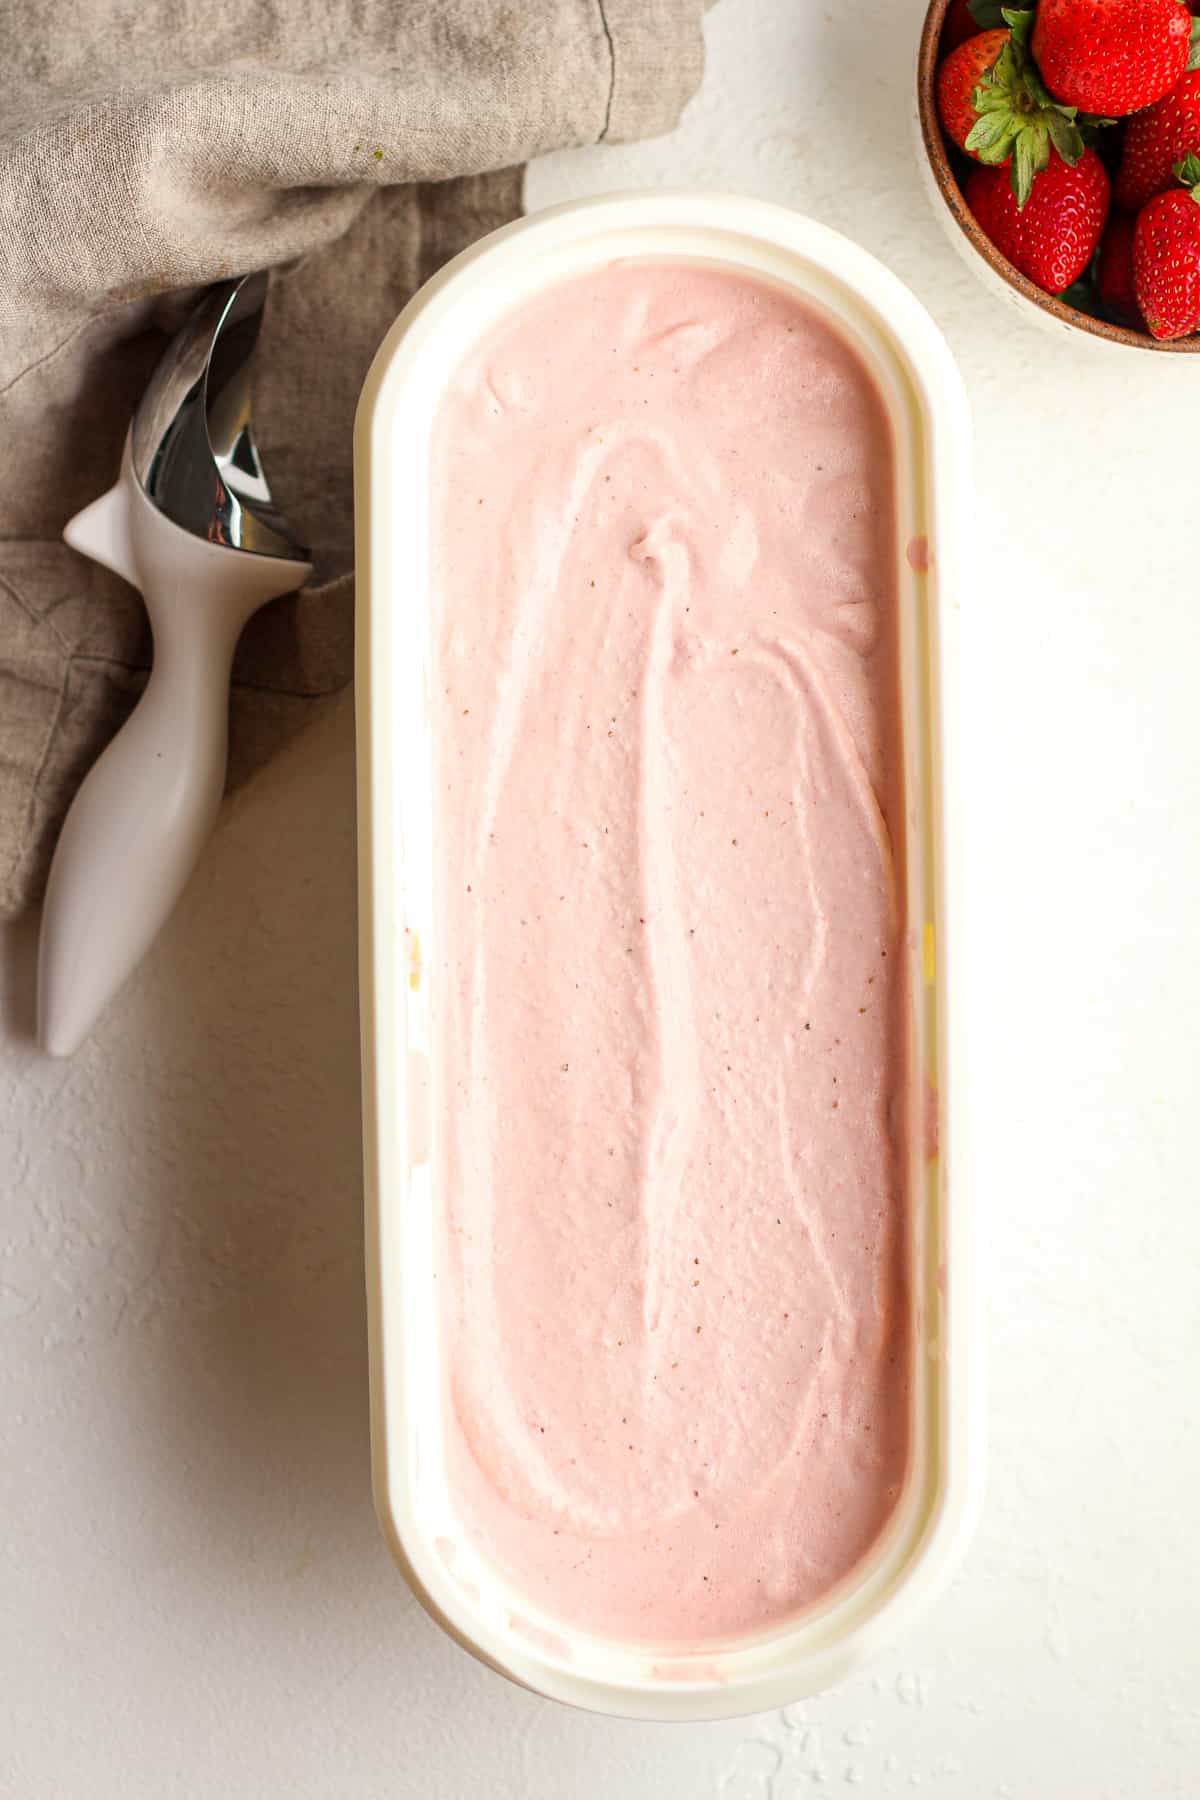 An oblong container of strawberry ice cream, with a bowl of strawberries.